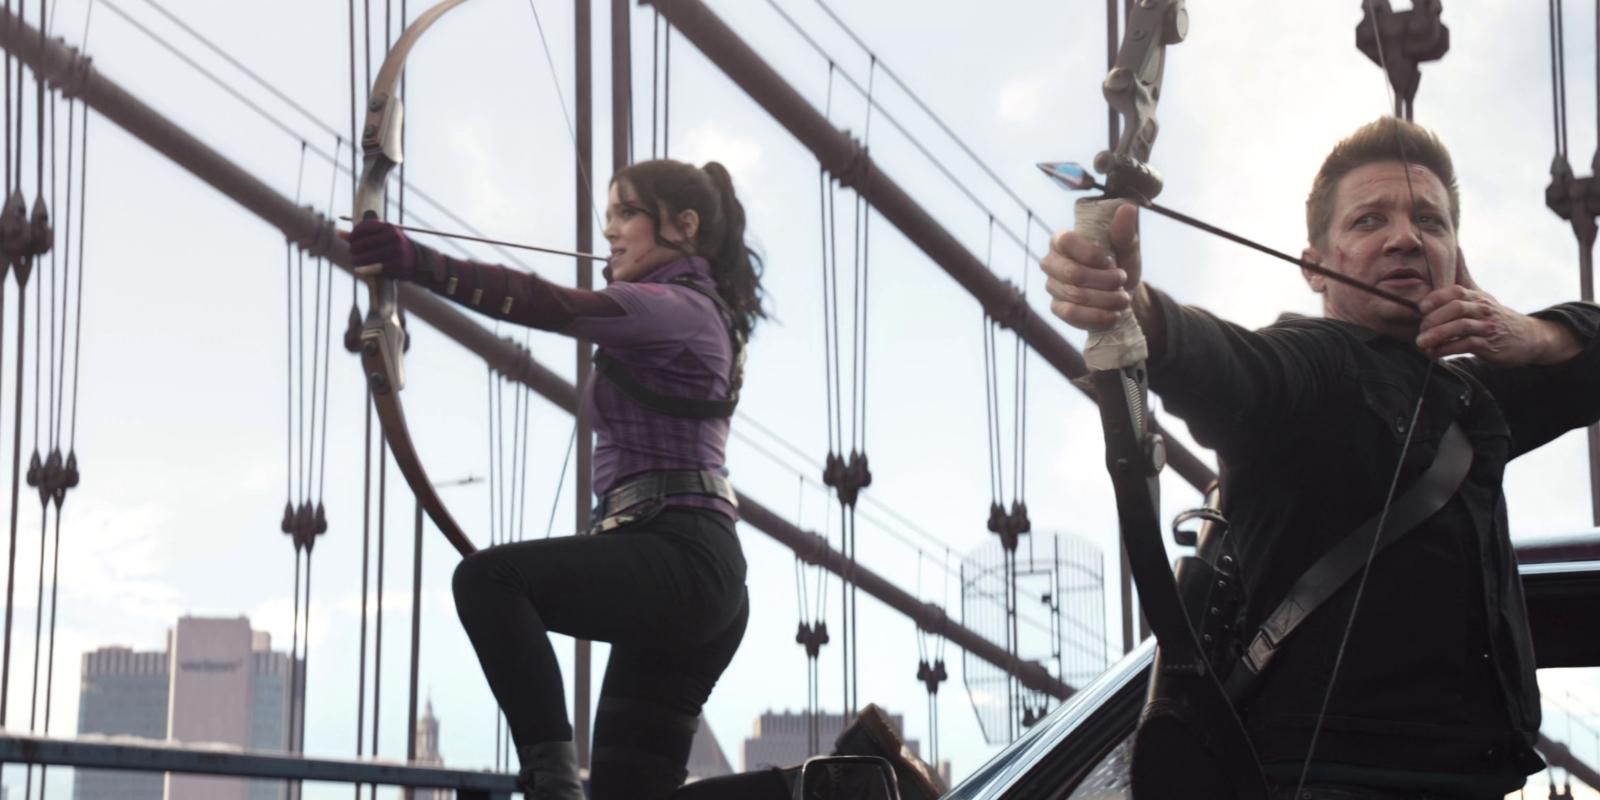 Kate Bishop strikes a hero pose in her archer outfit with Clint beside her in Hawkeye